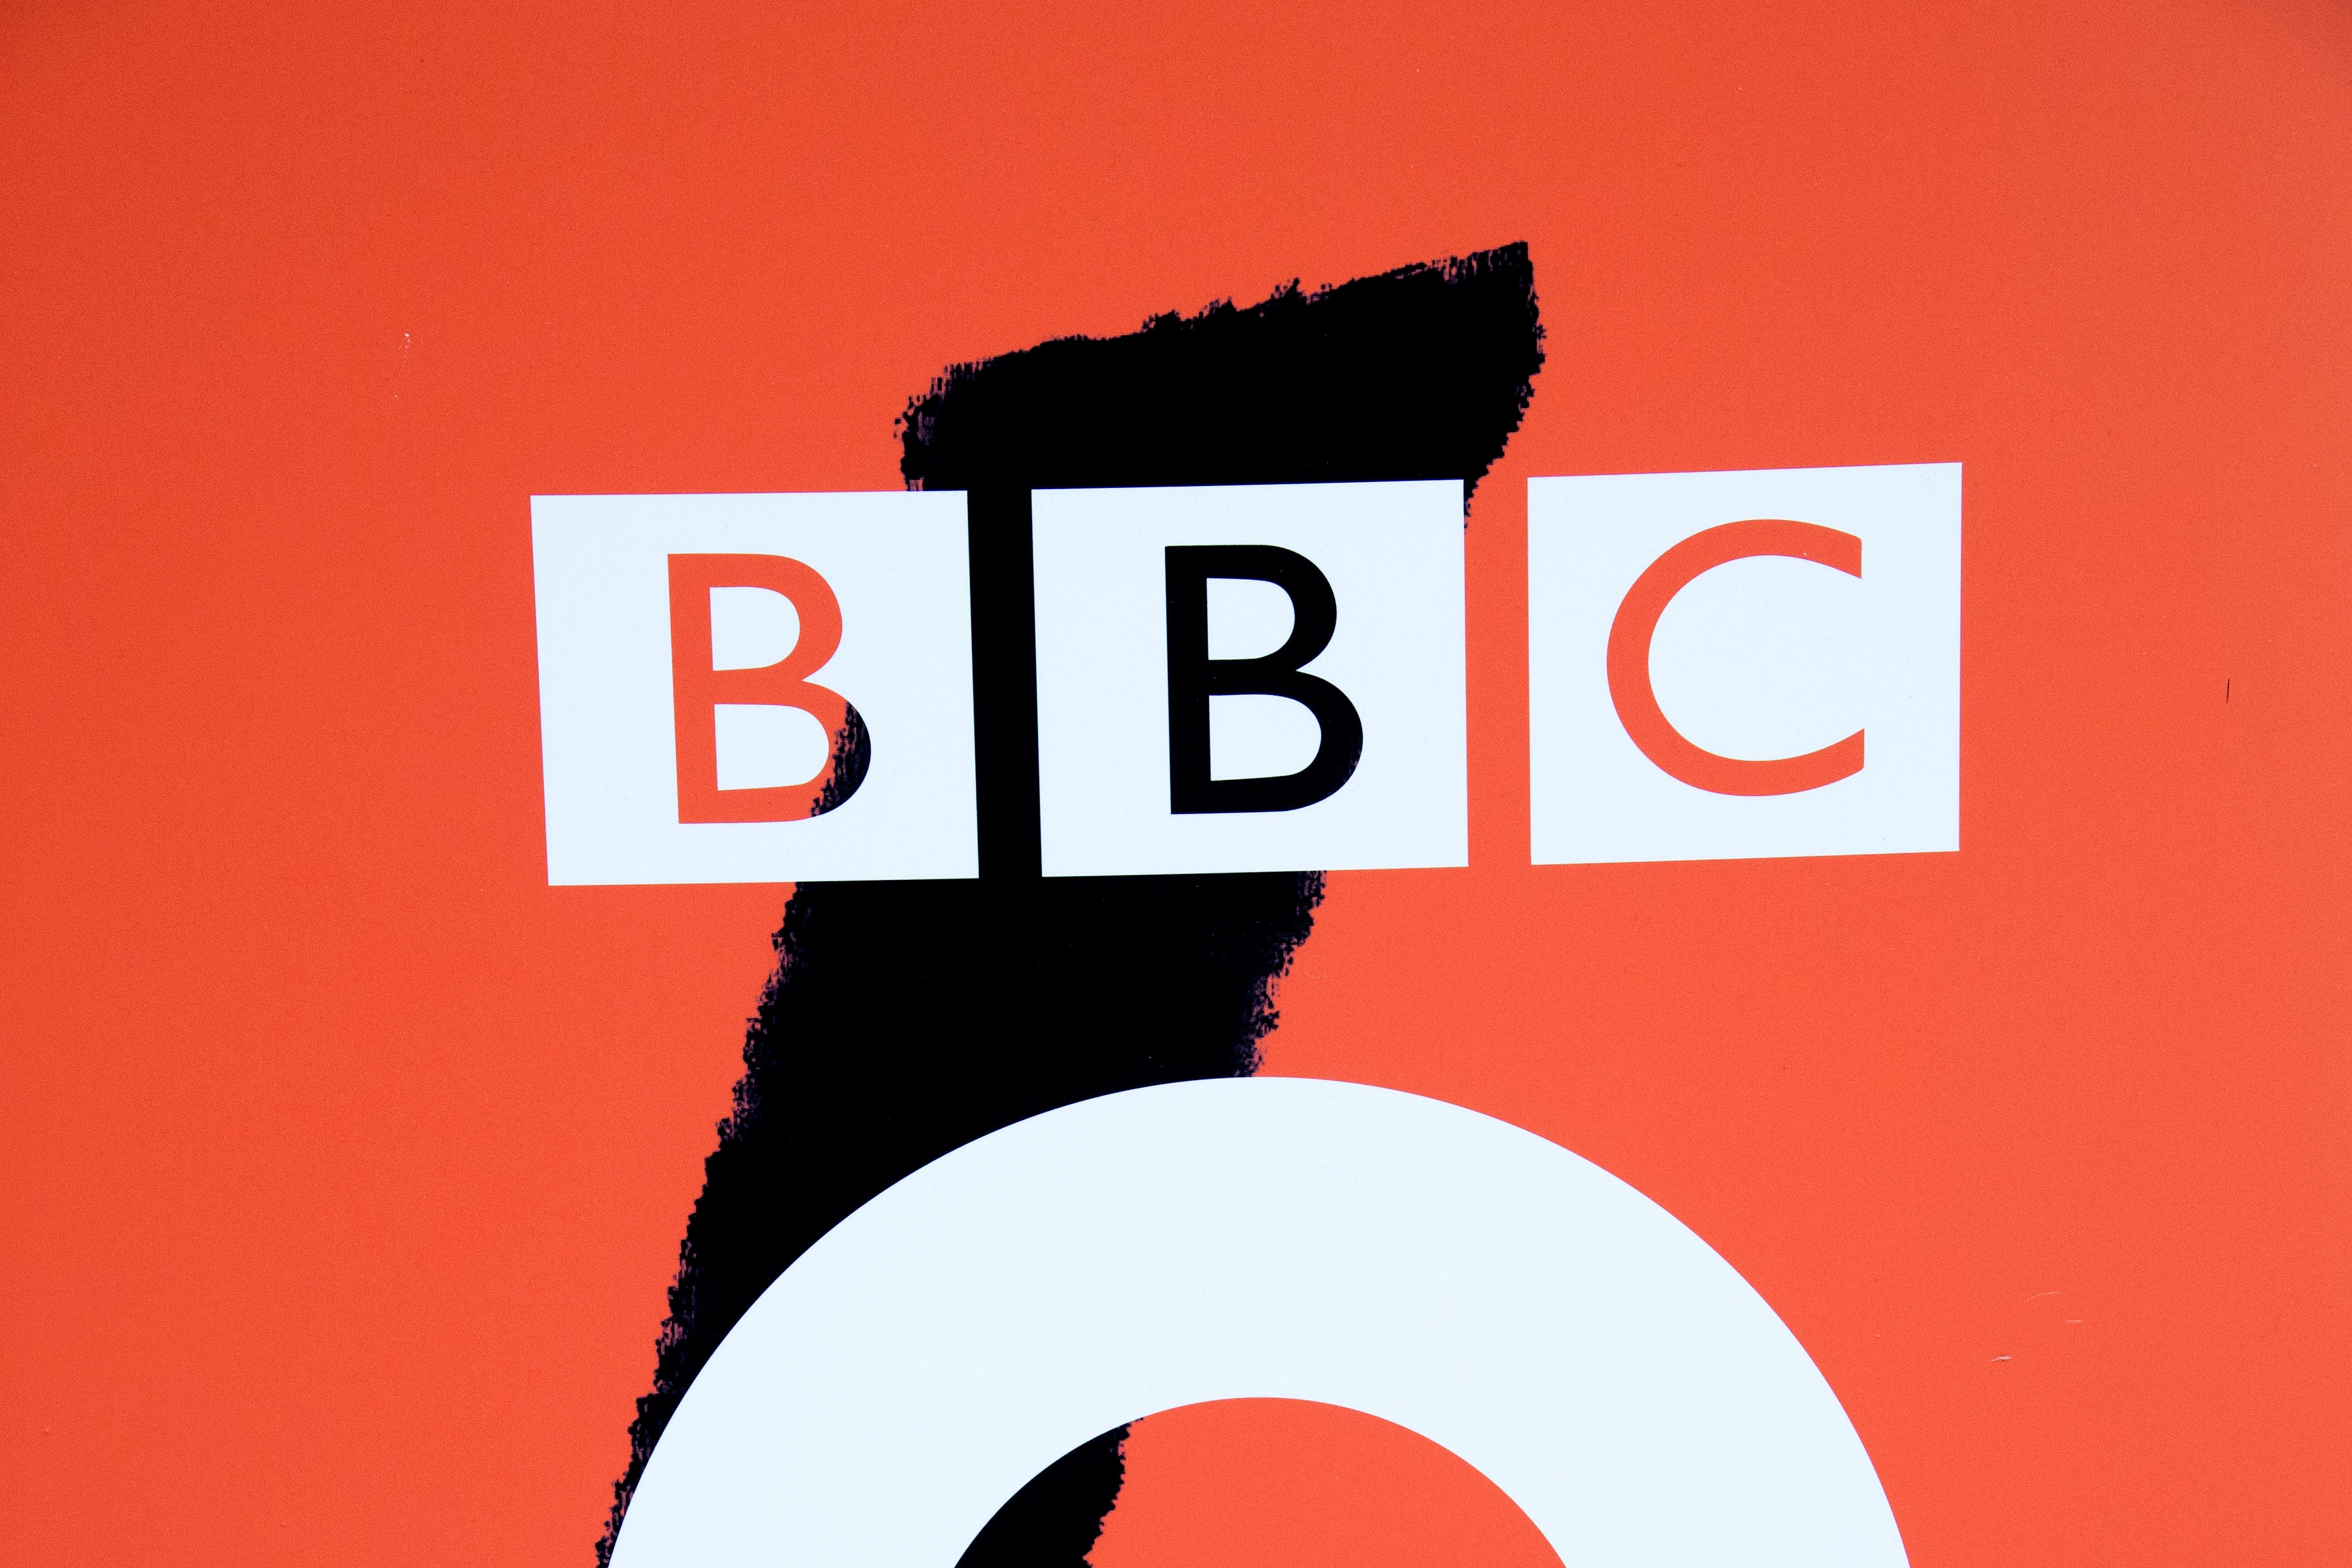 Commercial operators lose challenge over Ofcom approval of BBC Radio 1 Dance The Independent